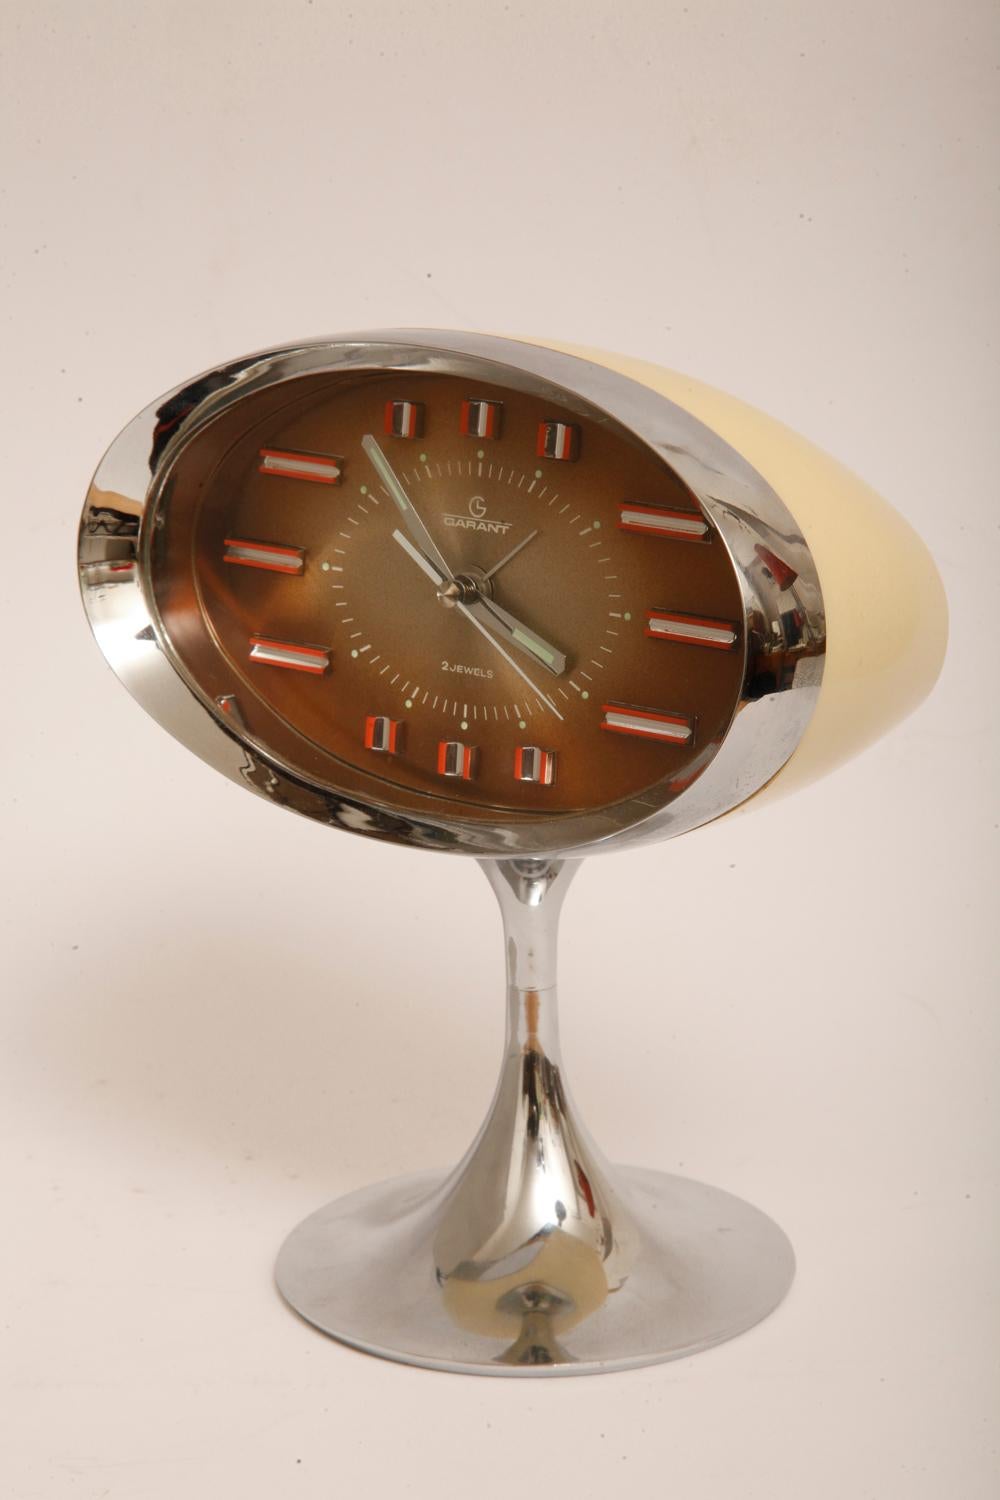 Japanese Space Age Alarm Clock Garant, Plastic and Chromed, 1970s For Sale 3